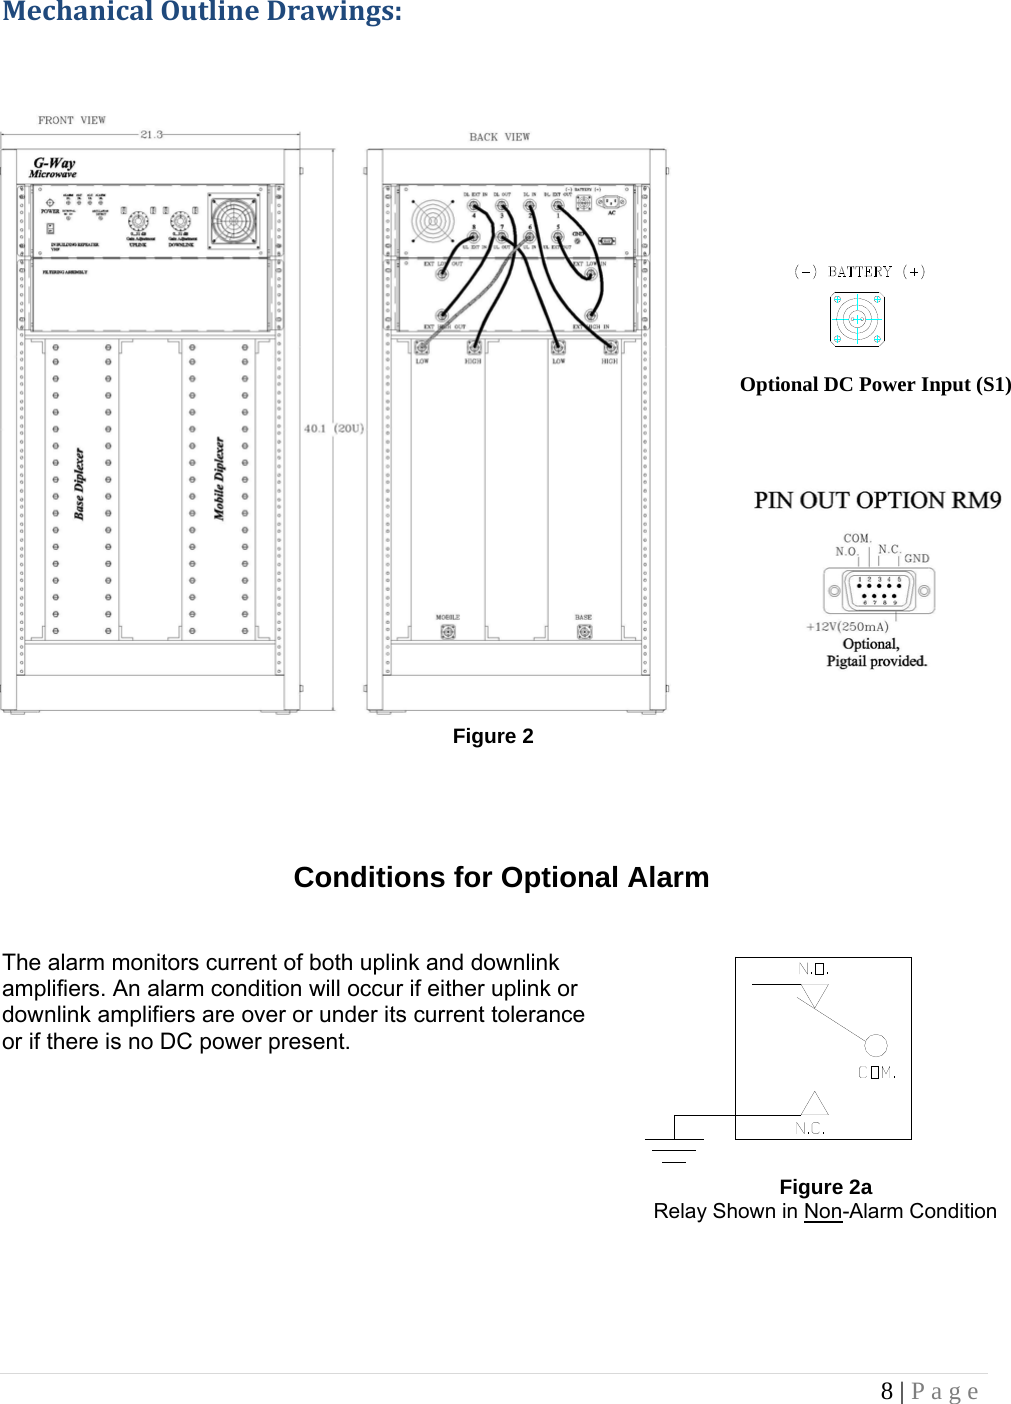 8 | Page  MechanicalOutlineDrawings:                           Figure 2          The alarm monitors current of both uplink and downlink amplifiers. An alarm condition will occur if either uplink or downlink amplifiers are over or under its current tolerance or if there is no DC power present.                                                                                                                                                                                                        Conditions for Optional AlarmOptional DC Power Input (S1) Figure 2a Relay Shown in Non-Alarm Condition